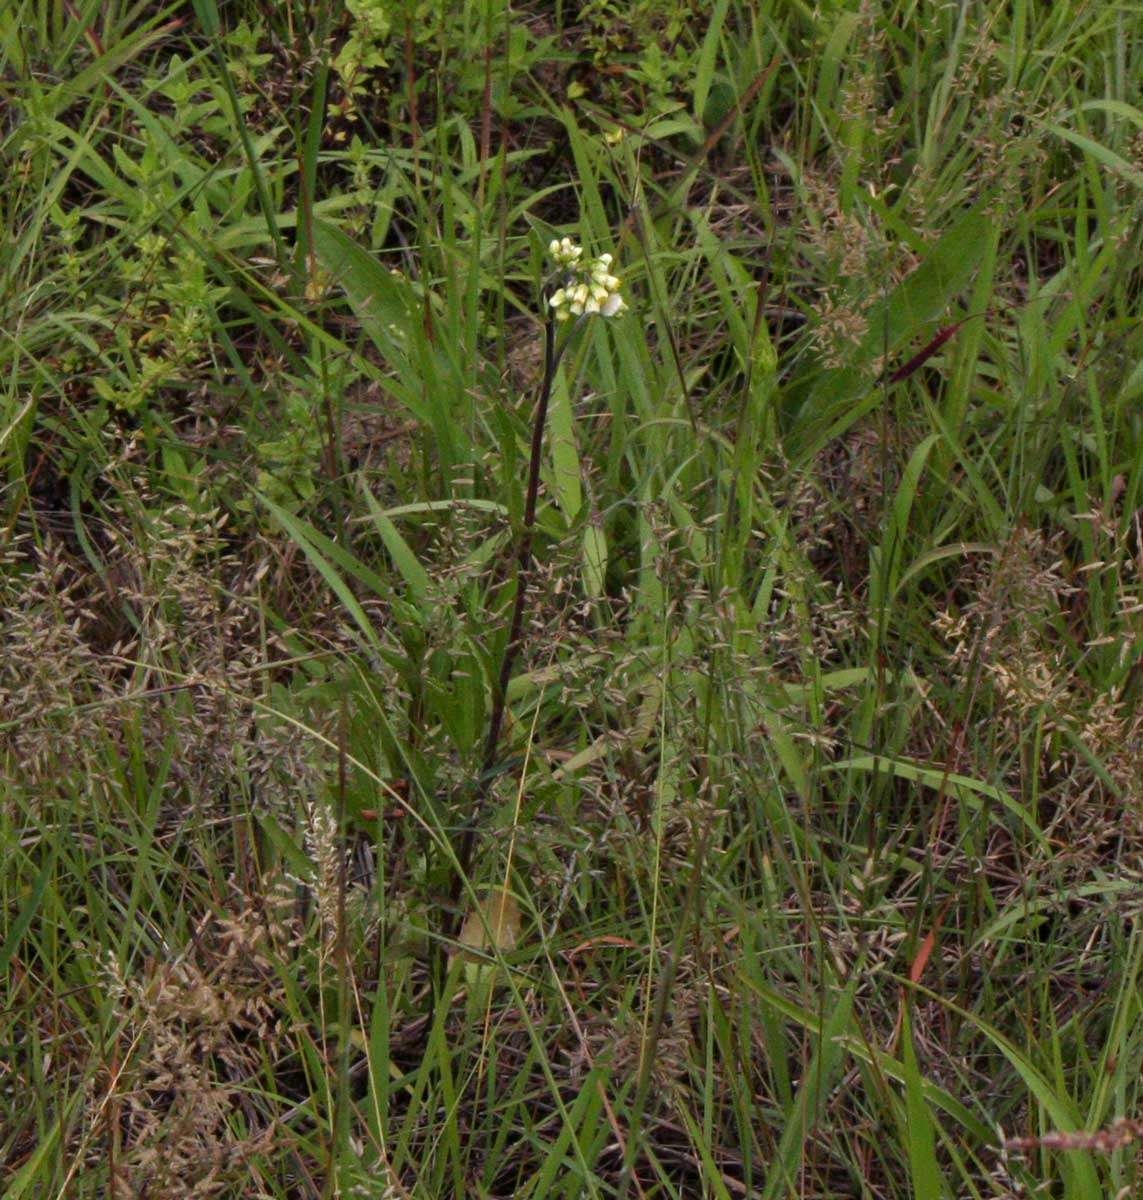 Image of horseweed